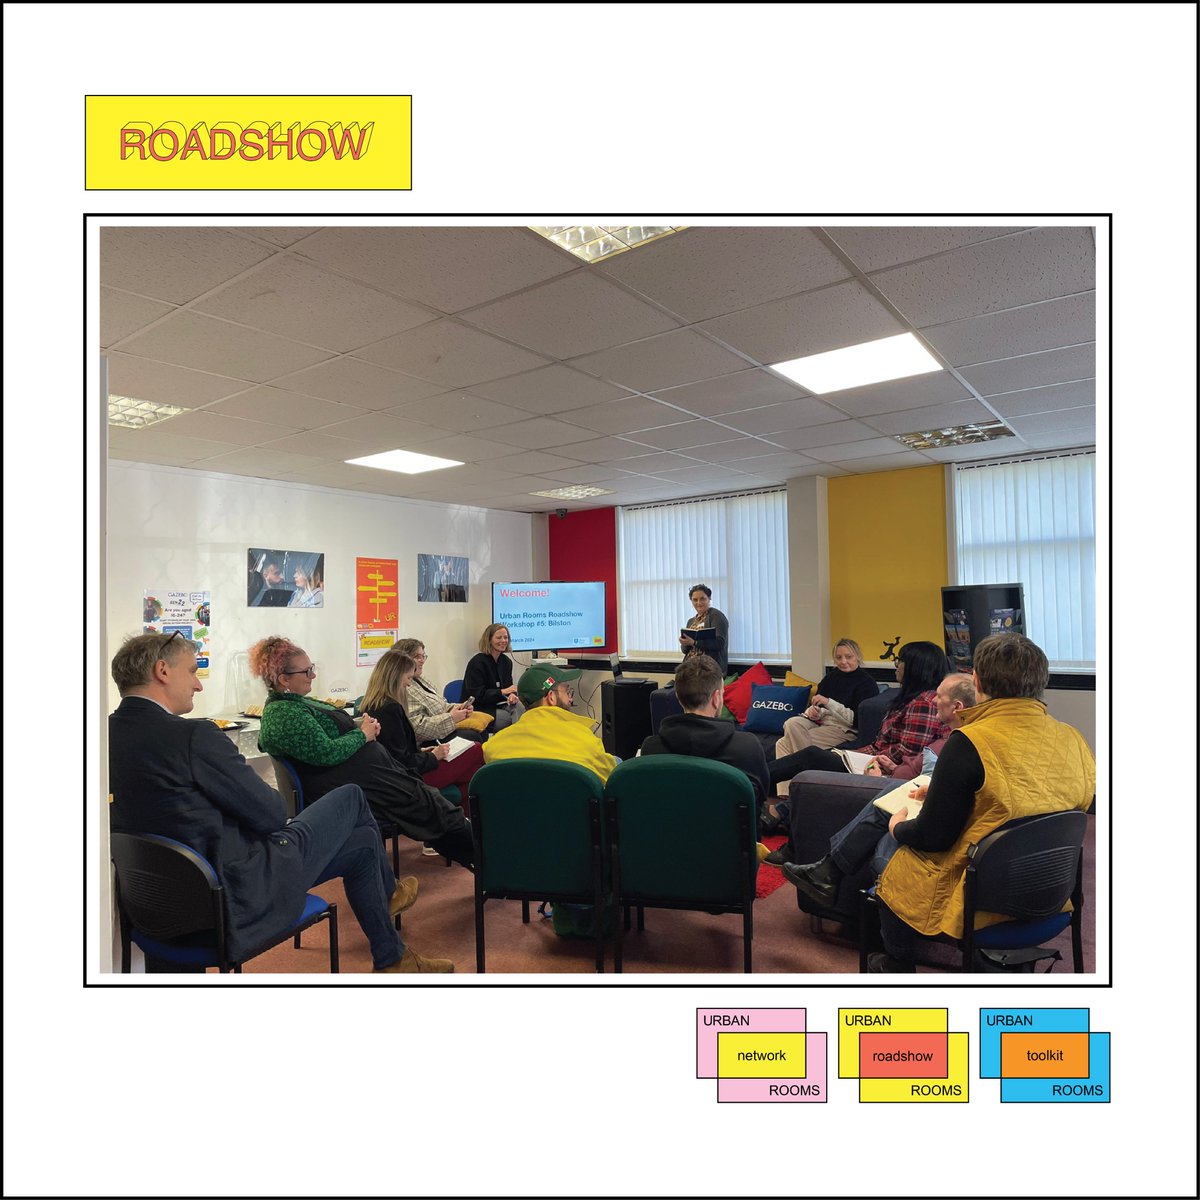 [1] The Urban Rooms Roadshow visits the West Midlands! Carolyn Butterworth, Diane Dever and Laura Alvarez from the Urban Rooms Network recently facilitated two successful Urban Rooms Roadshow workshops in Wolverhampton and Bilston in the West Midlands.